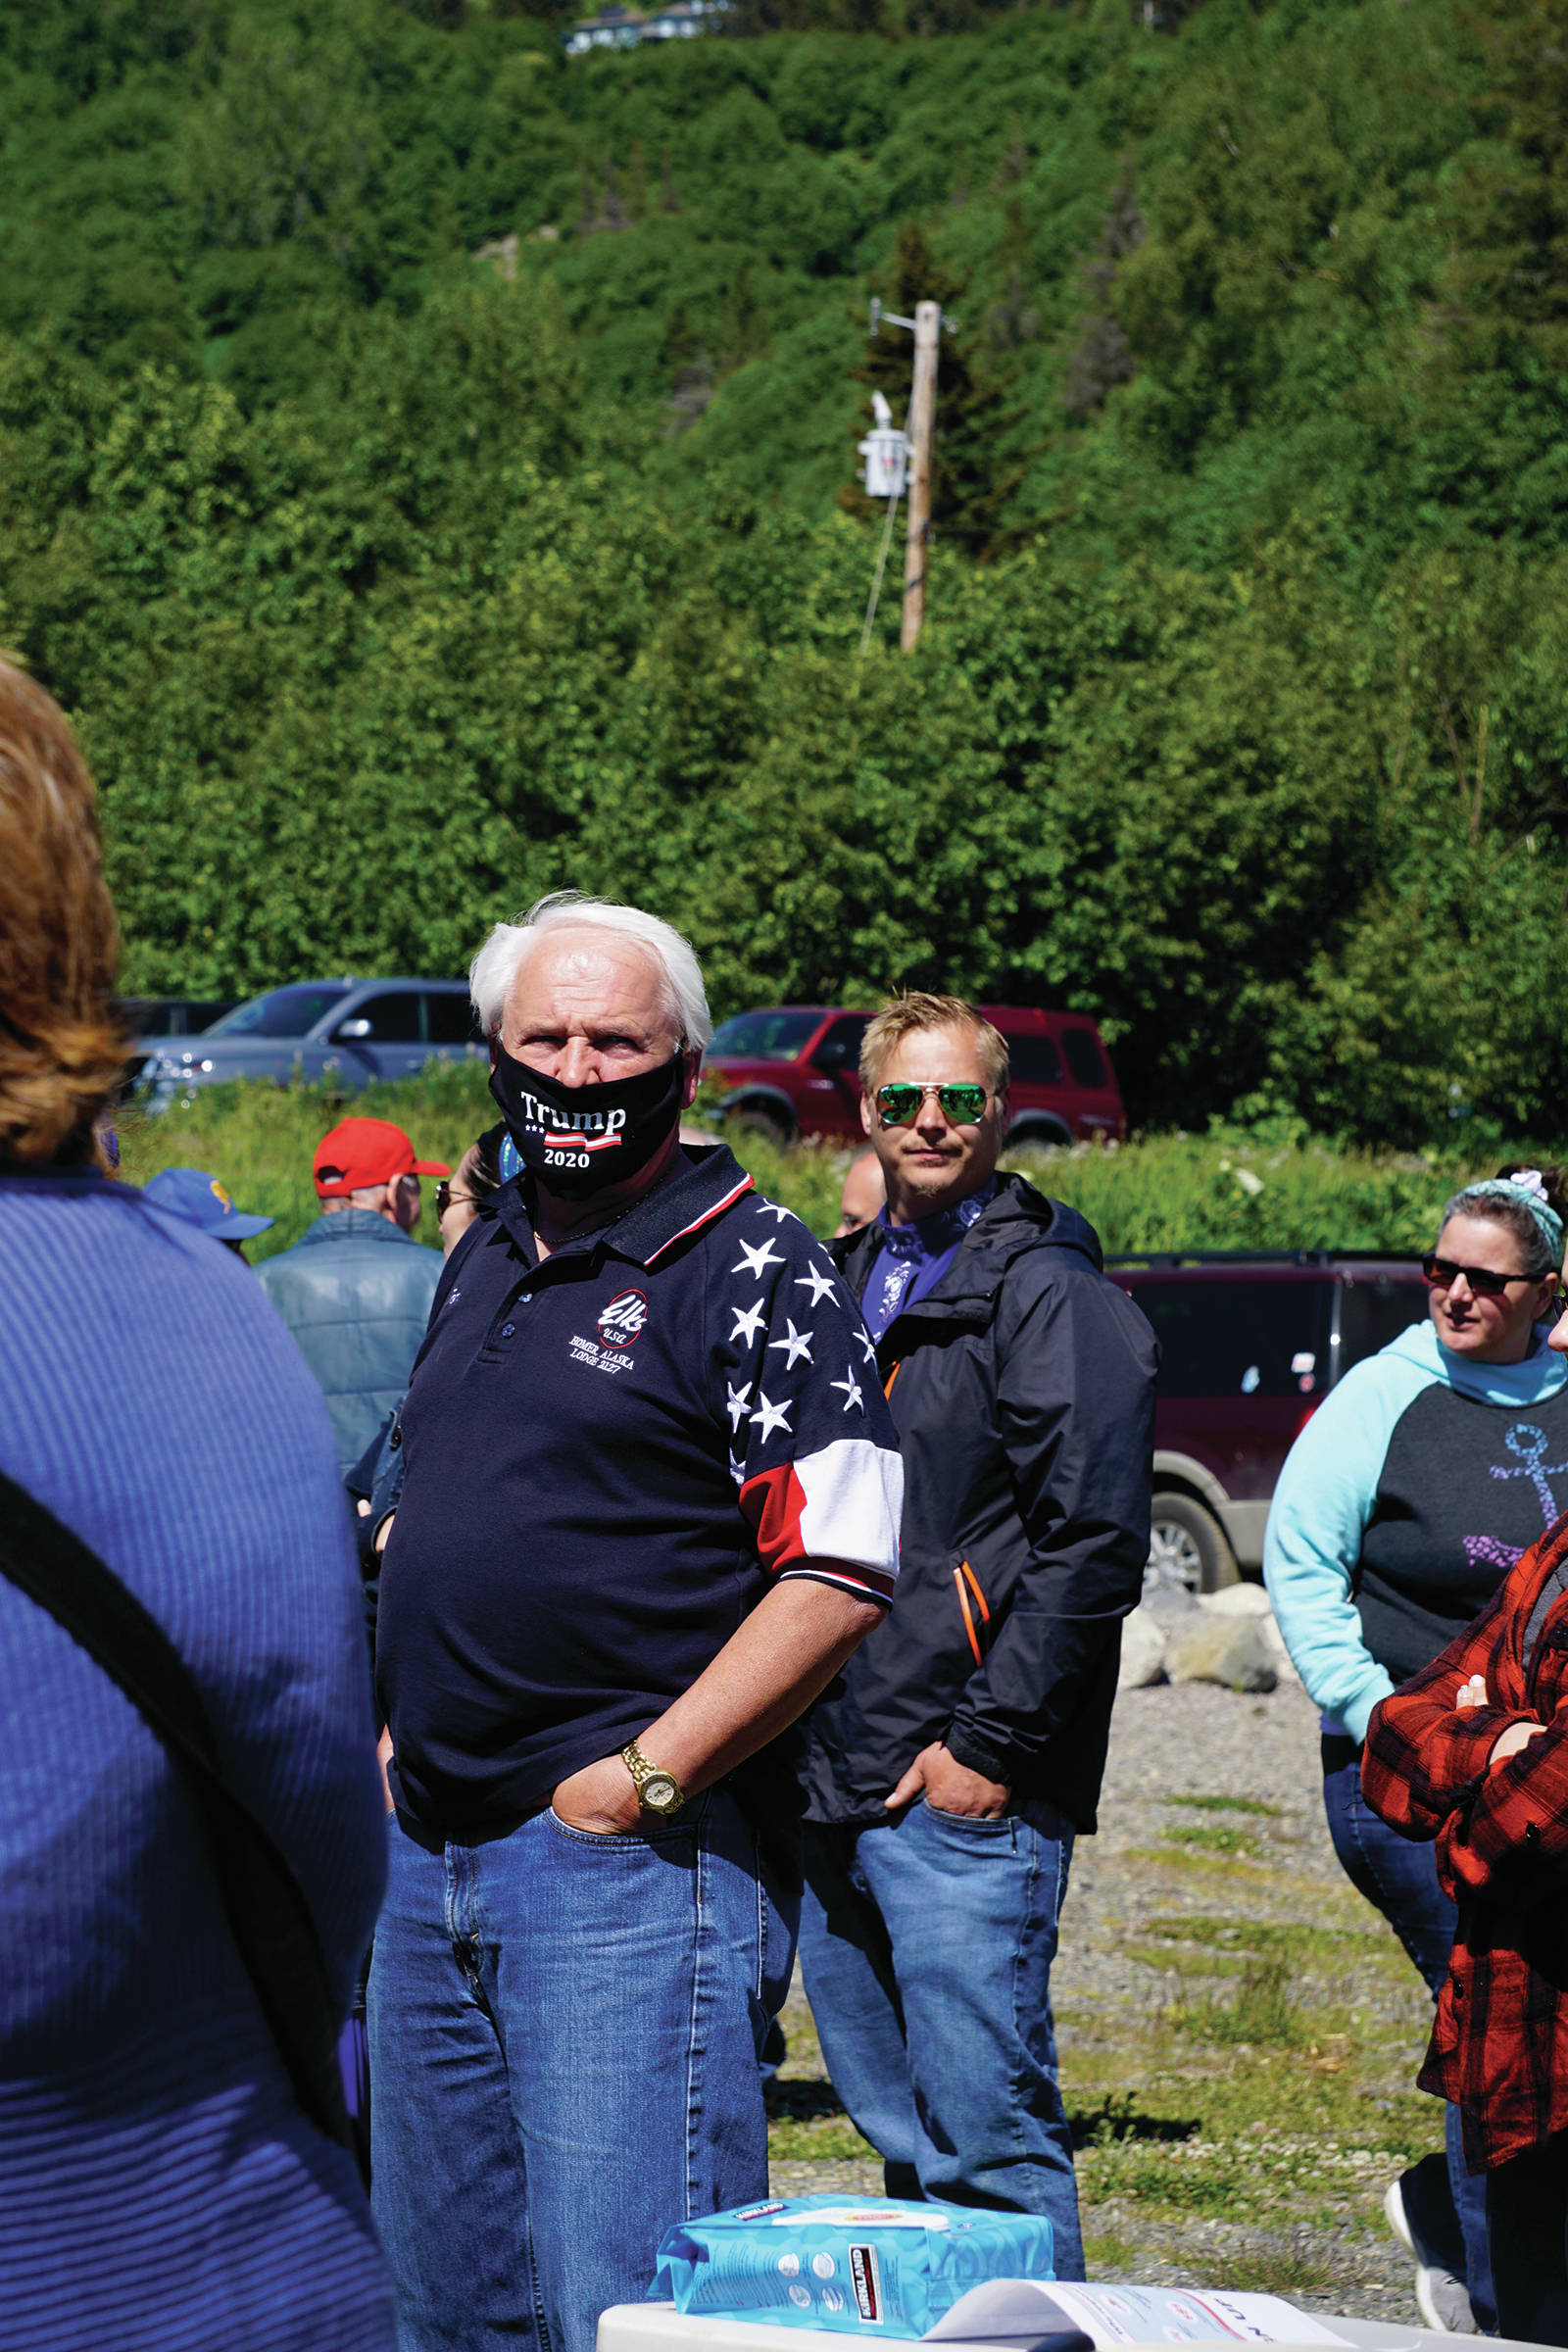 A man wearing a Trump 2020 face mask listens to Rep. Sarah Vance, R-Homer, at a kickoff for her re-election campaign on Sunday, June 14, 2020, at Karen Hornaday Park in Homer, Alaska. (Photo by Michael Armstrong/Homer News)